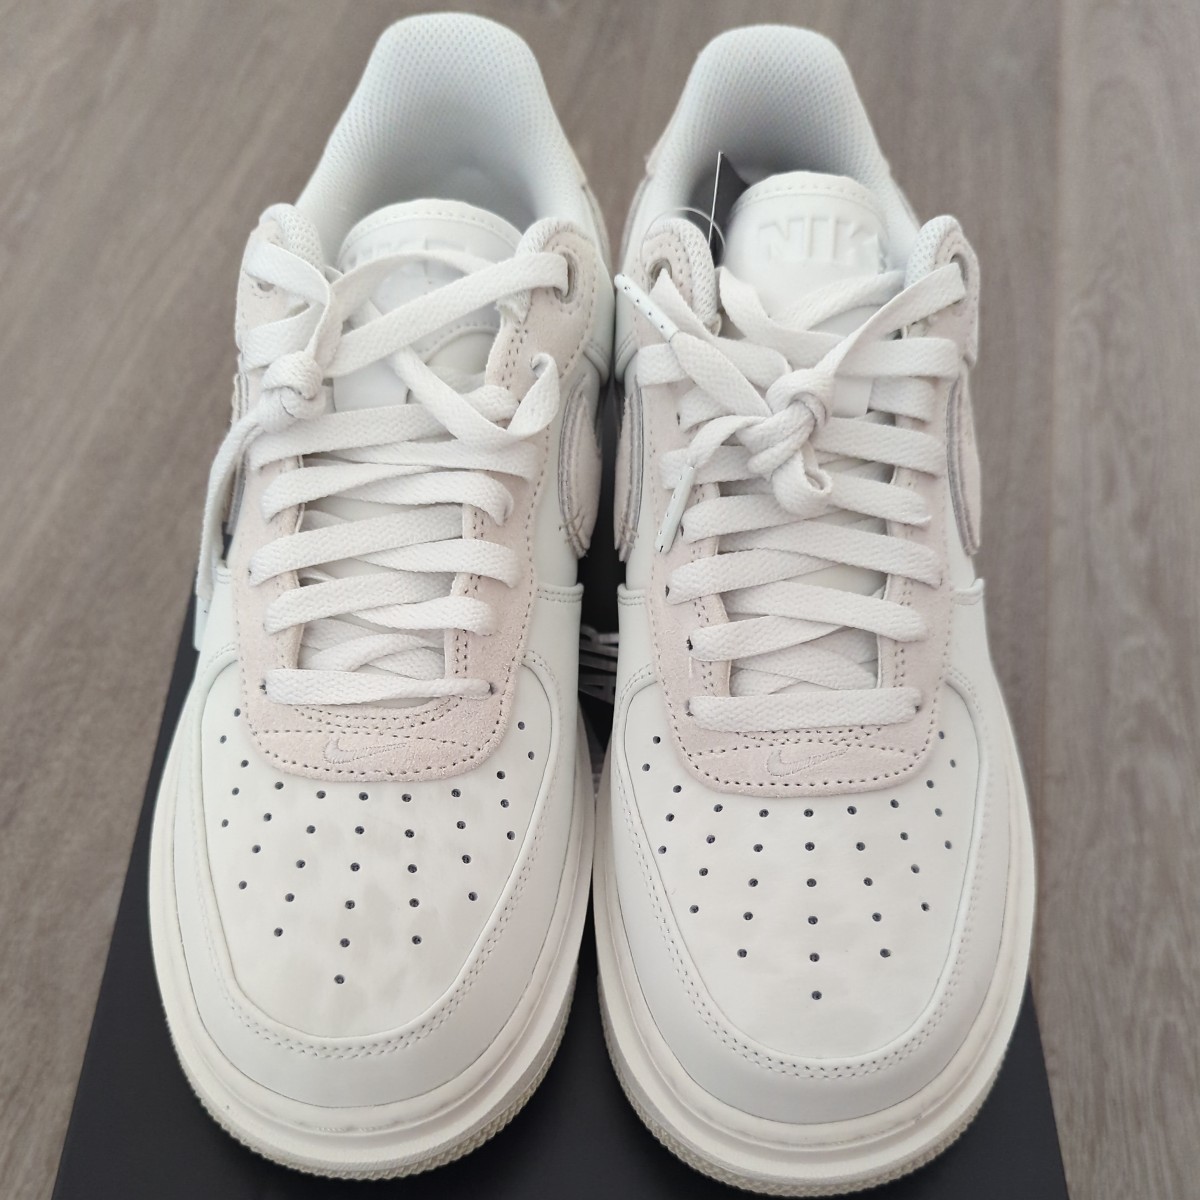 NIKE AIR FORCE 1 LUXE ナイキ エアフォース1 ラックス_画像4